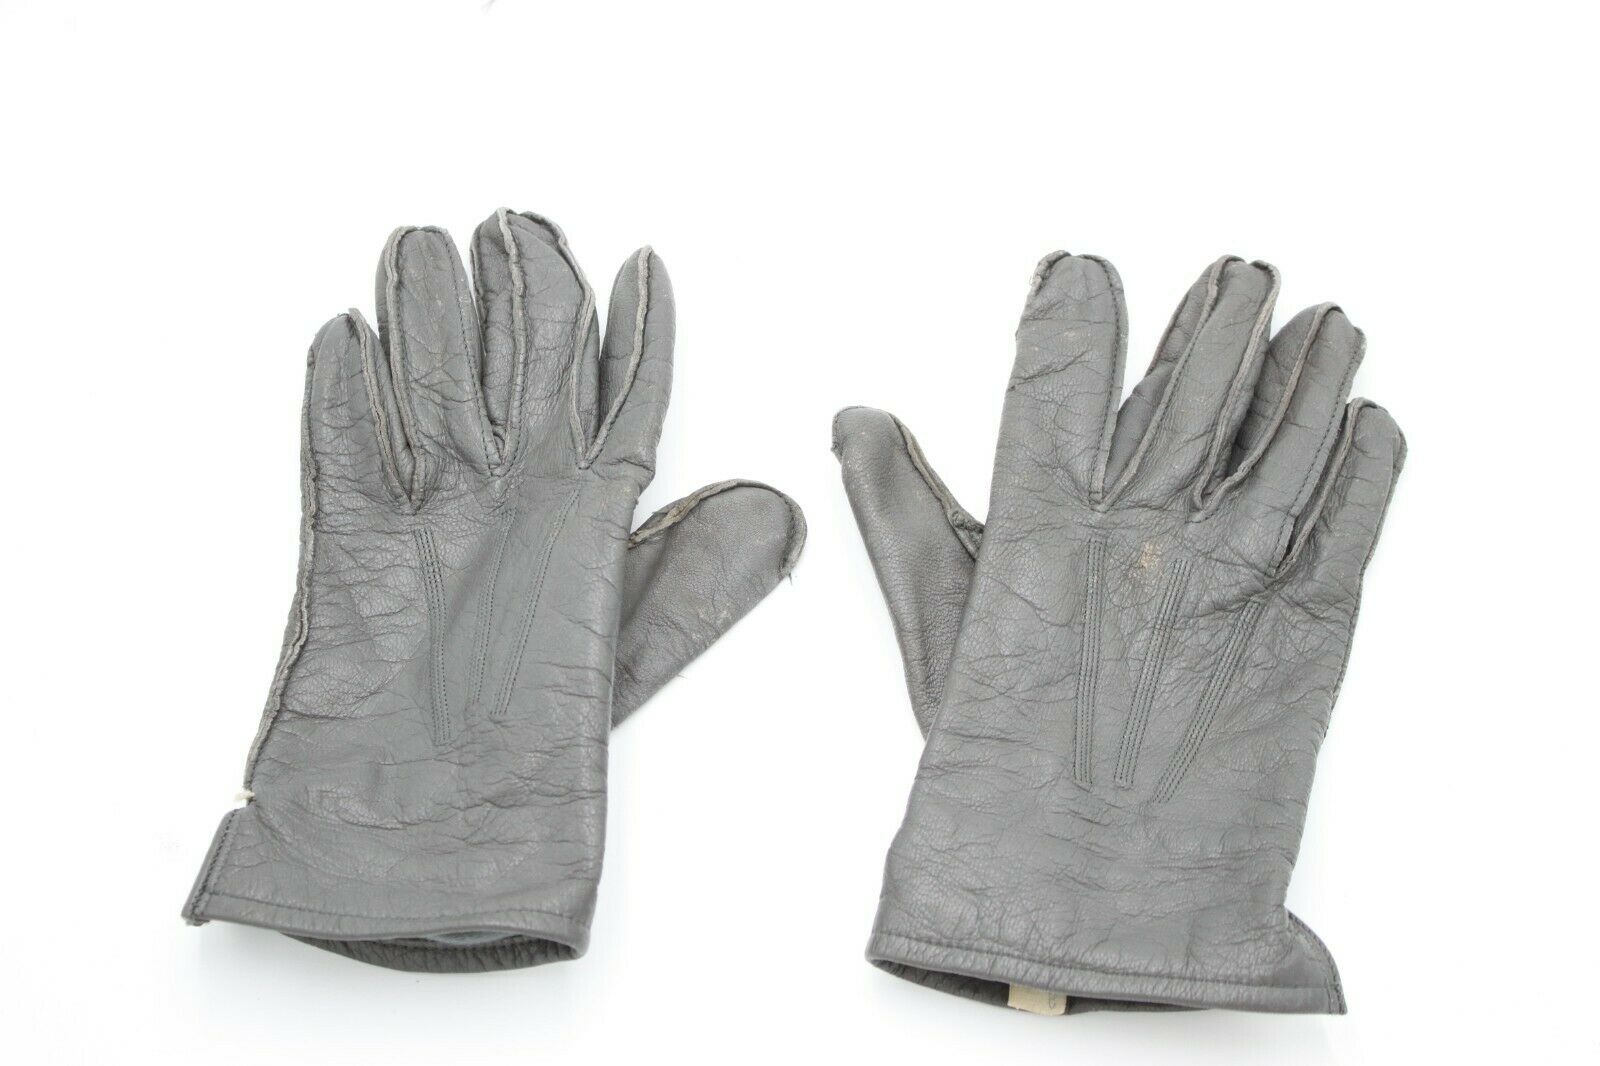 German Army Officer Leather Gloves Military Issue Dress Gray G+S 4414 Size 9